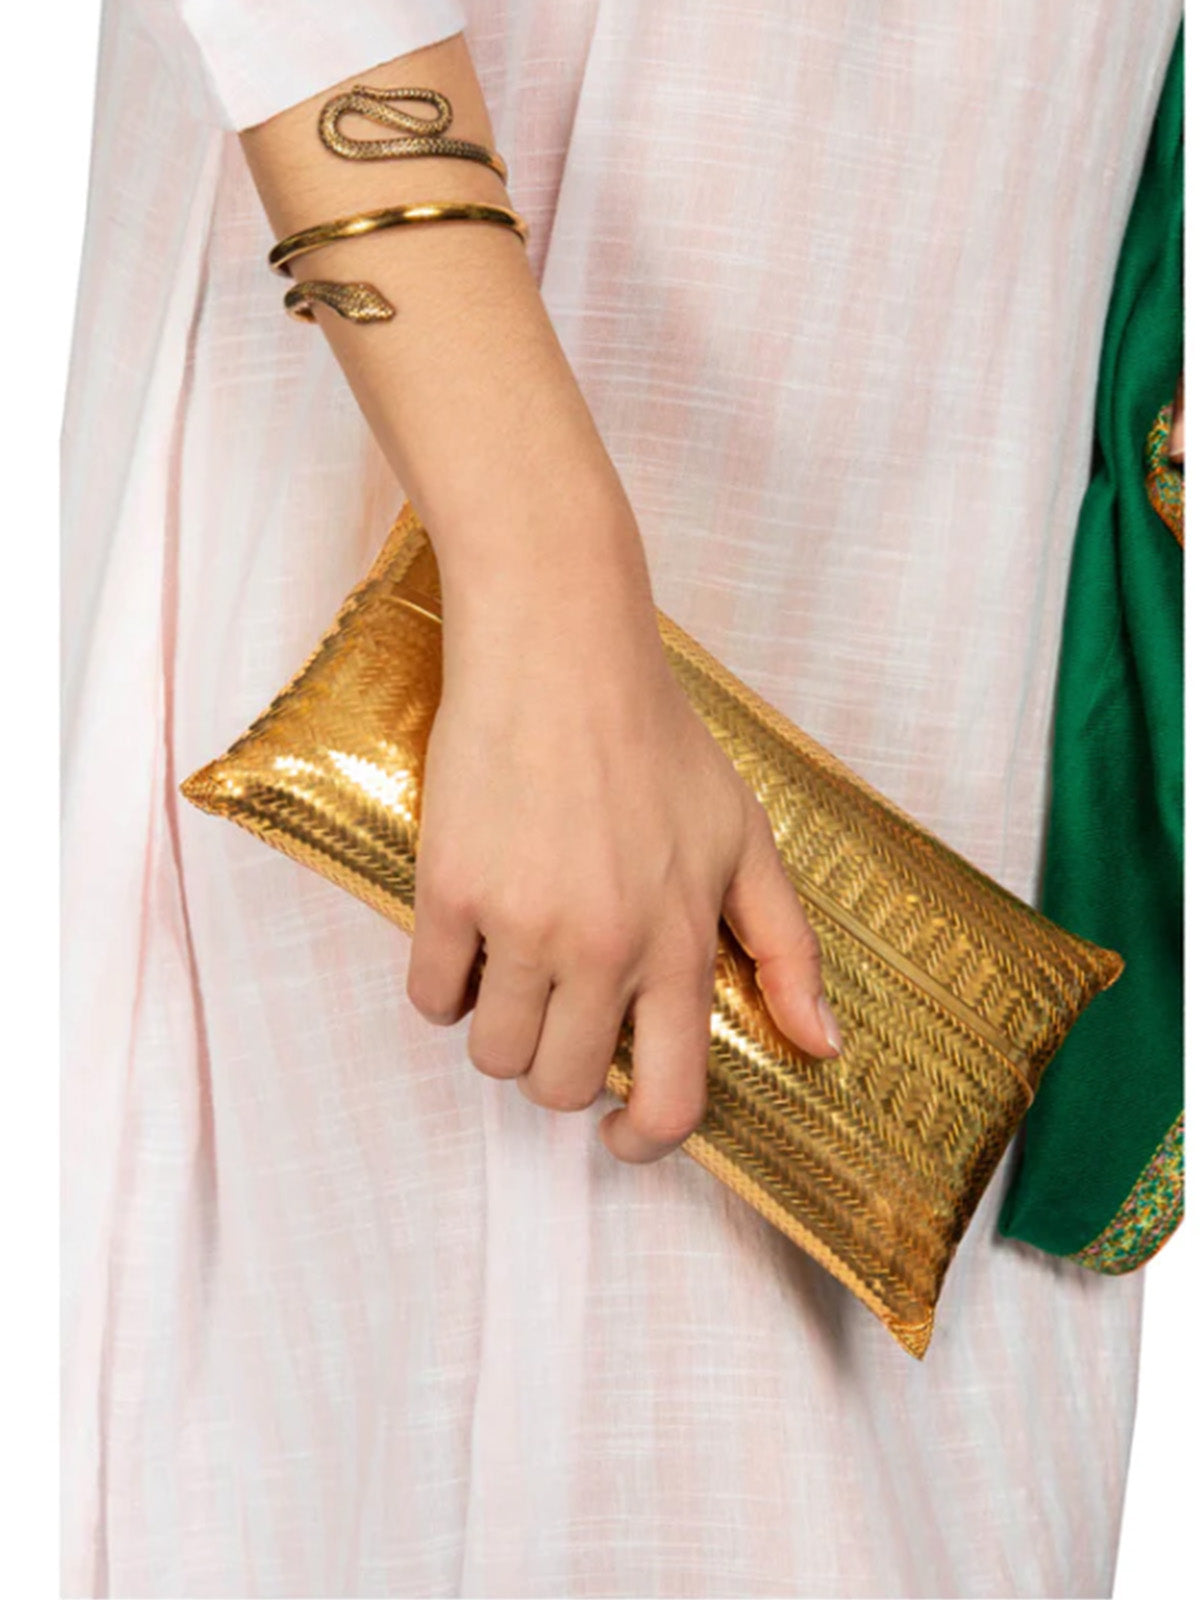 Large Gold Woven Clutch Bag